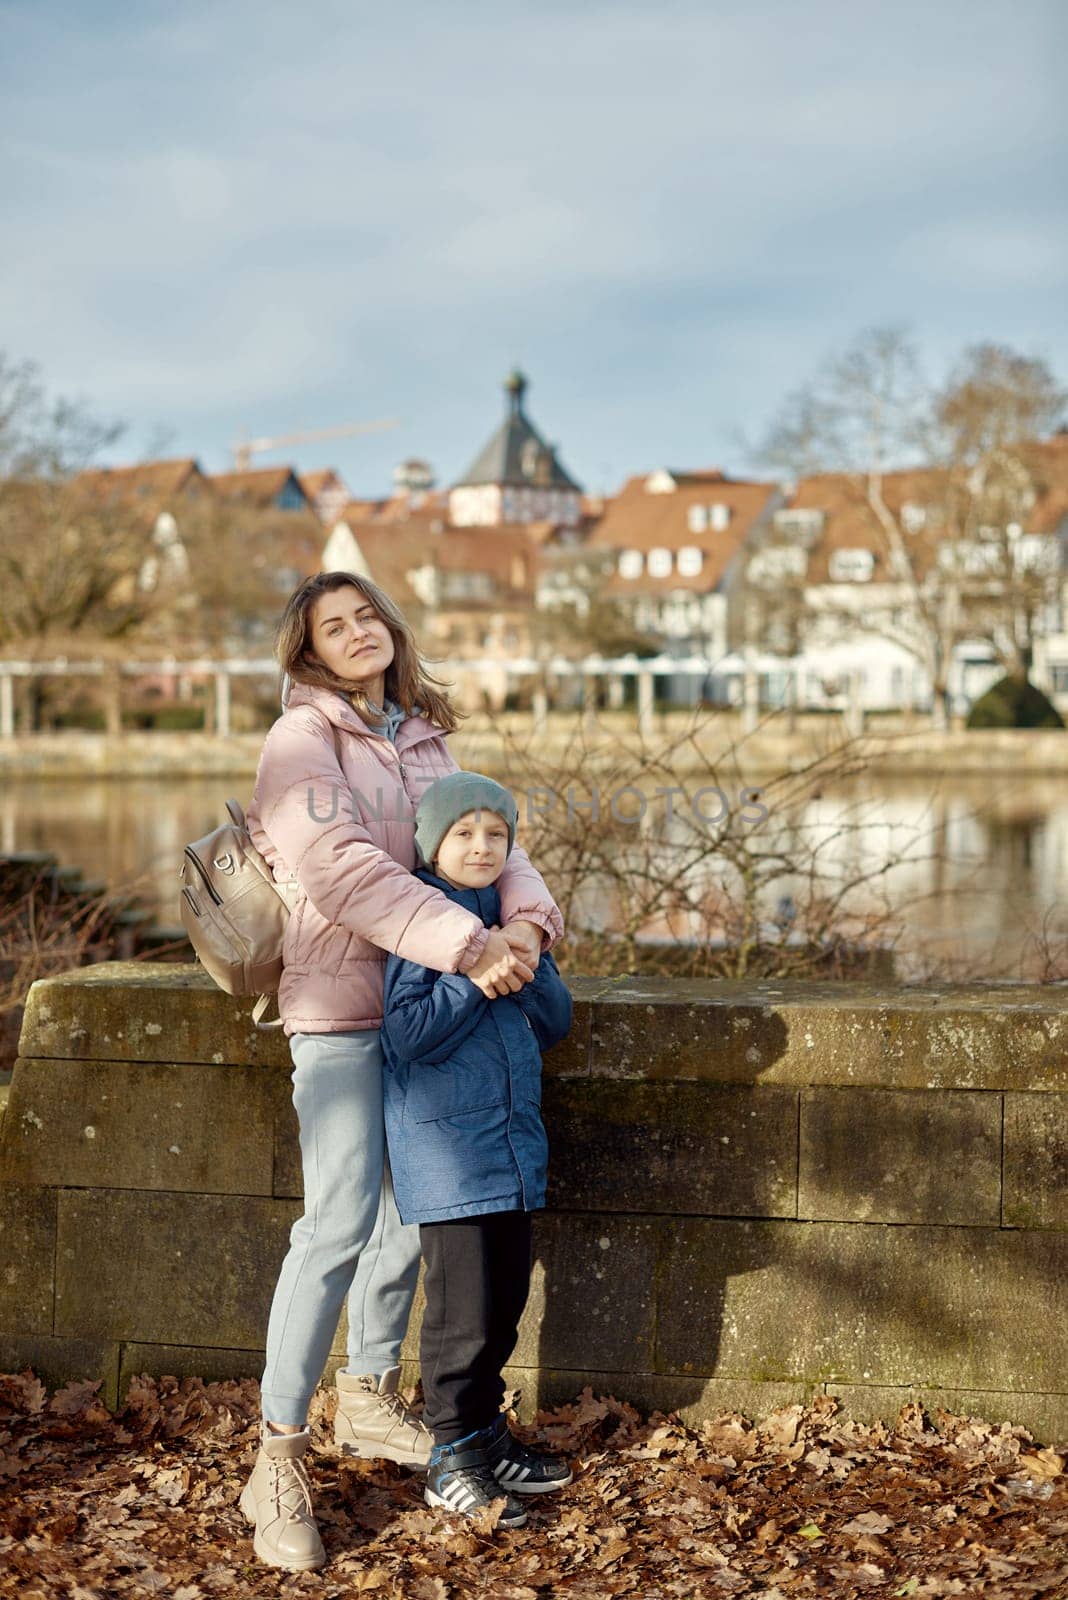 Riverside Family Harmony: Mother, 30 Years Old, and Son - Beautiful 8-Year-Old Boy, Standing by Neckar River and Historic Half-Timbered Town, Bietigheim-Bissingen, Germany, Autumn by Andrii_Ko